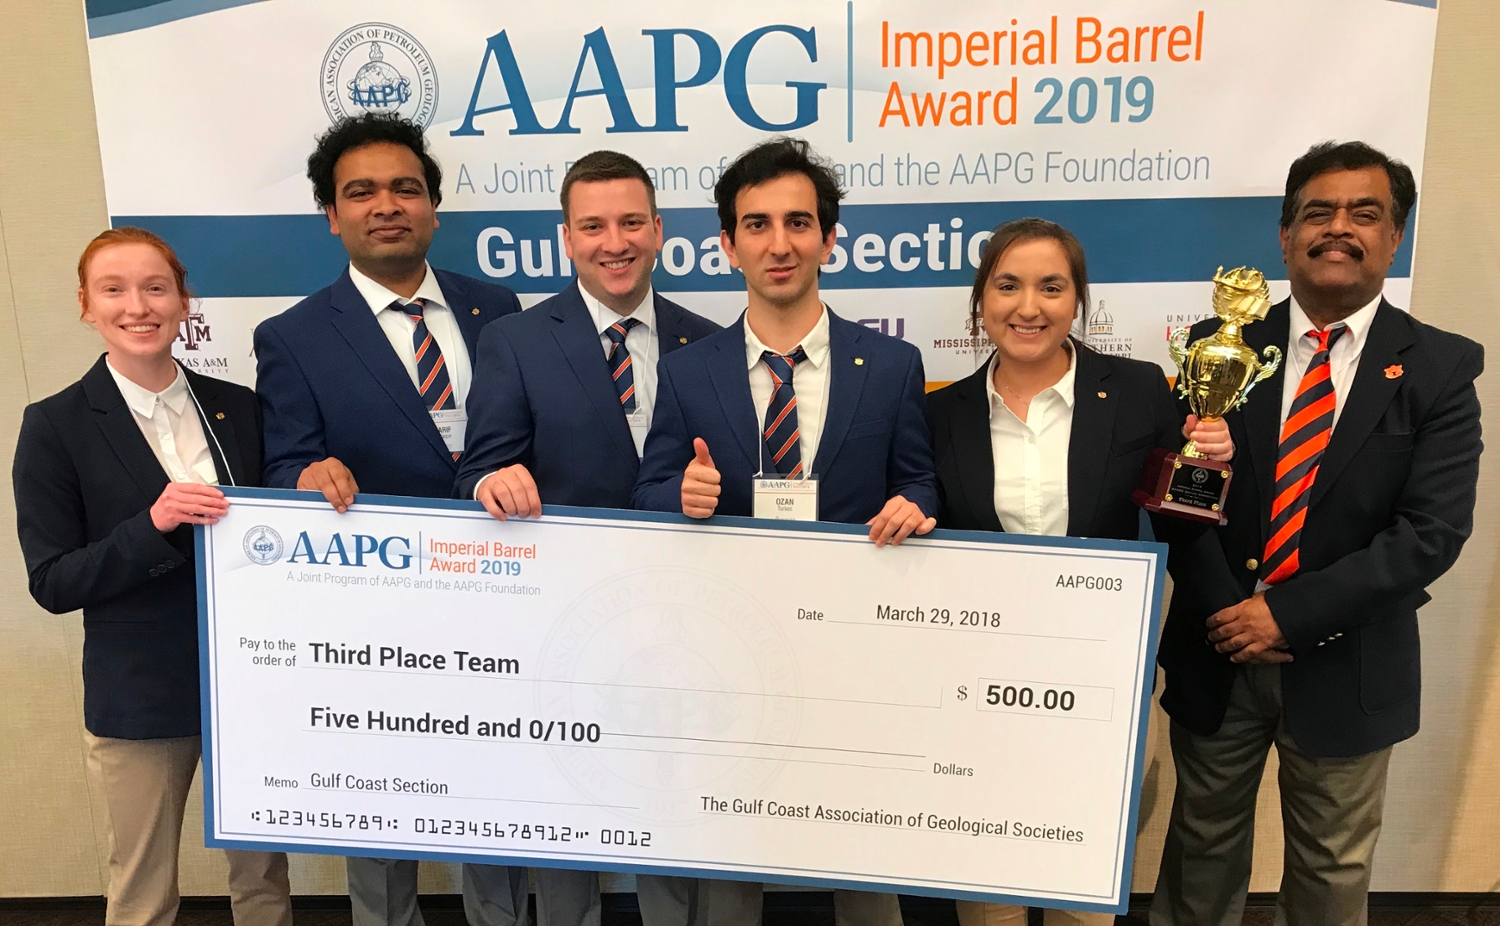 For The Second Consecutive Year, Auburn University Students Shine at Imperial Barrel Award Program